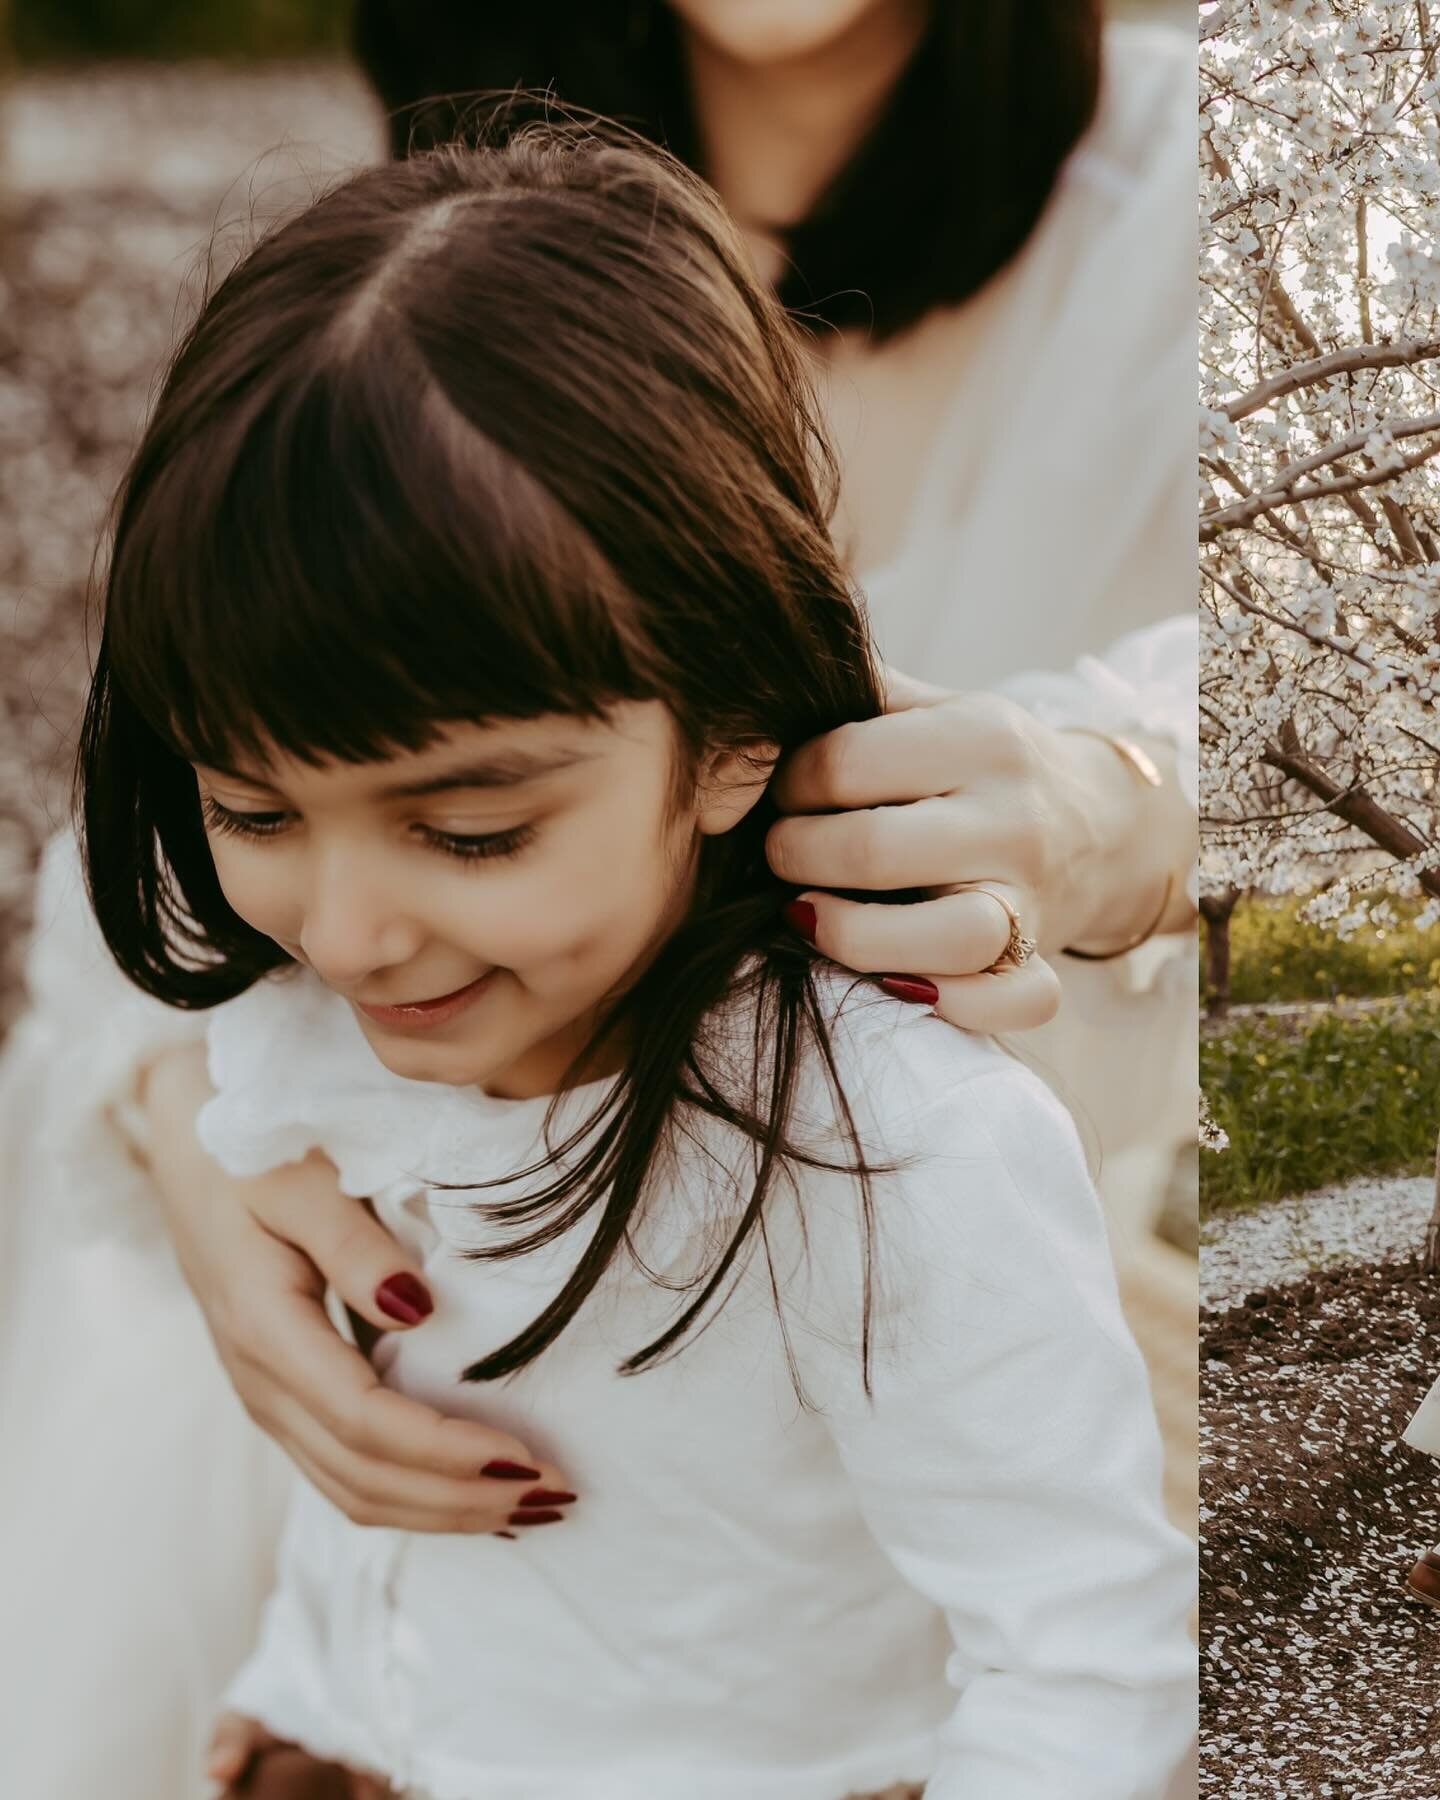 The almond orchard was once again transformed into a magical setting for a beautiful family session, filled with love, laughter, and cherished memories. Each family brought their own unique energy and personality to the shoot, creating a tapestry of 